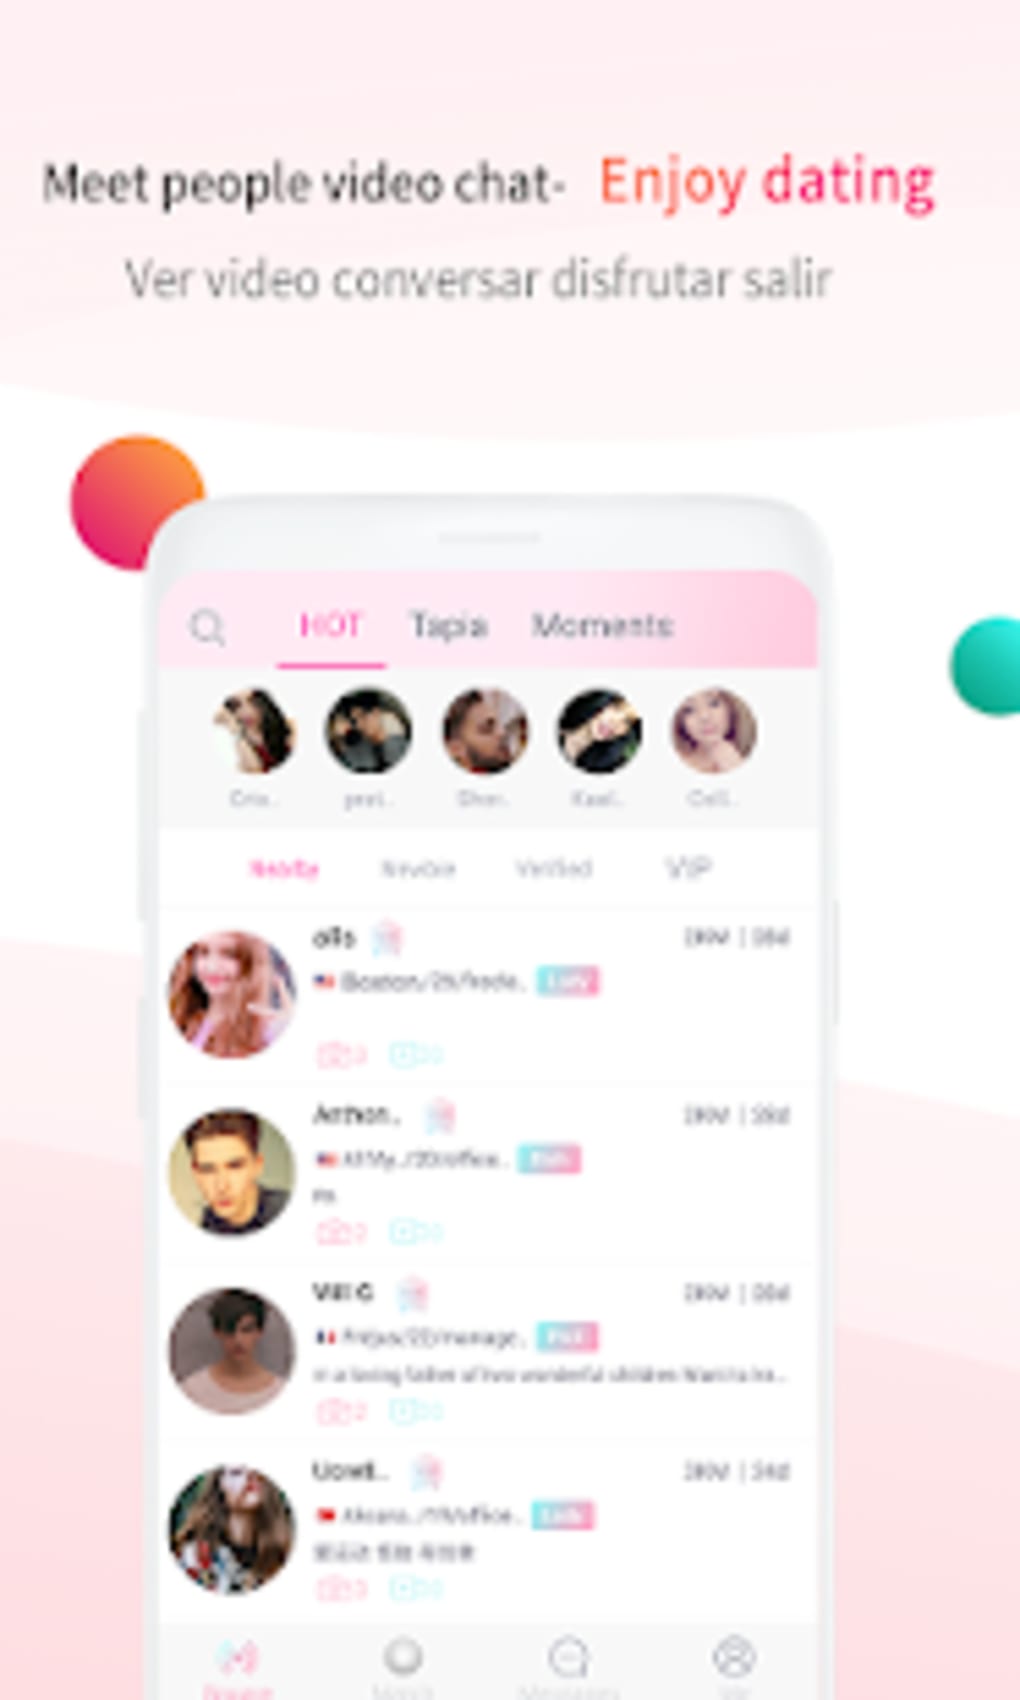 Free video chat dating app